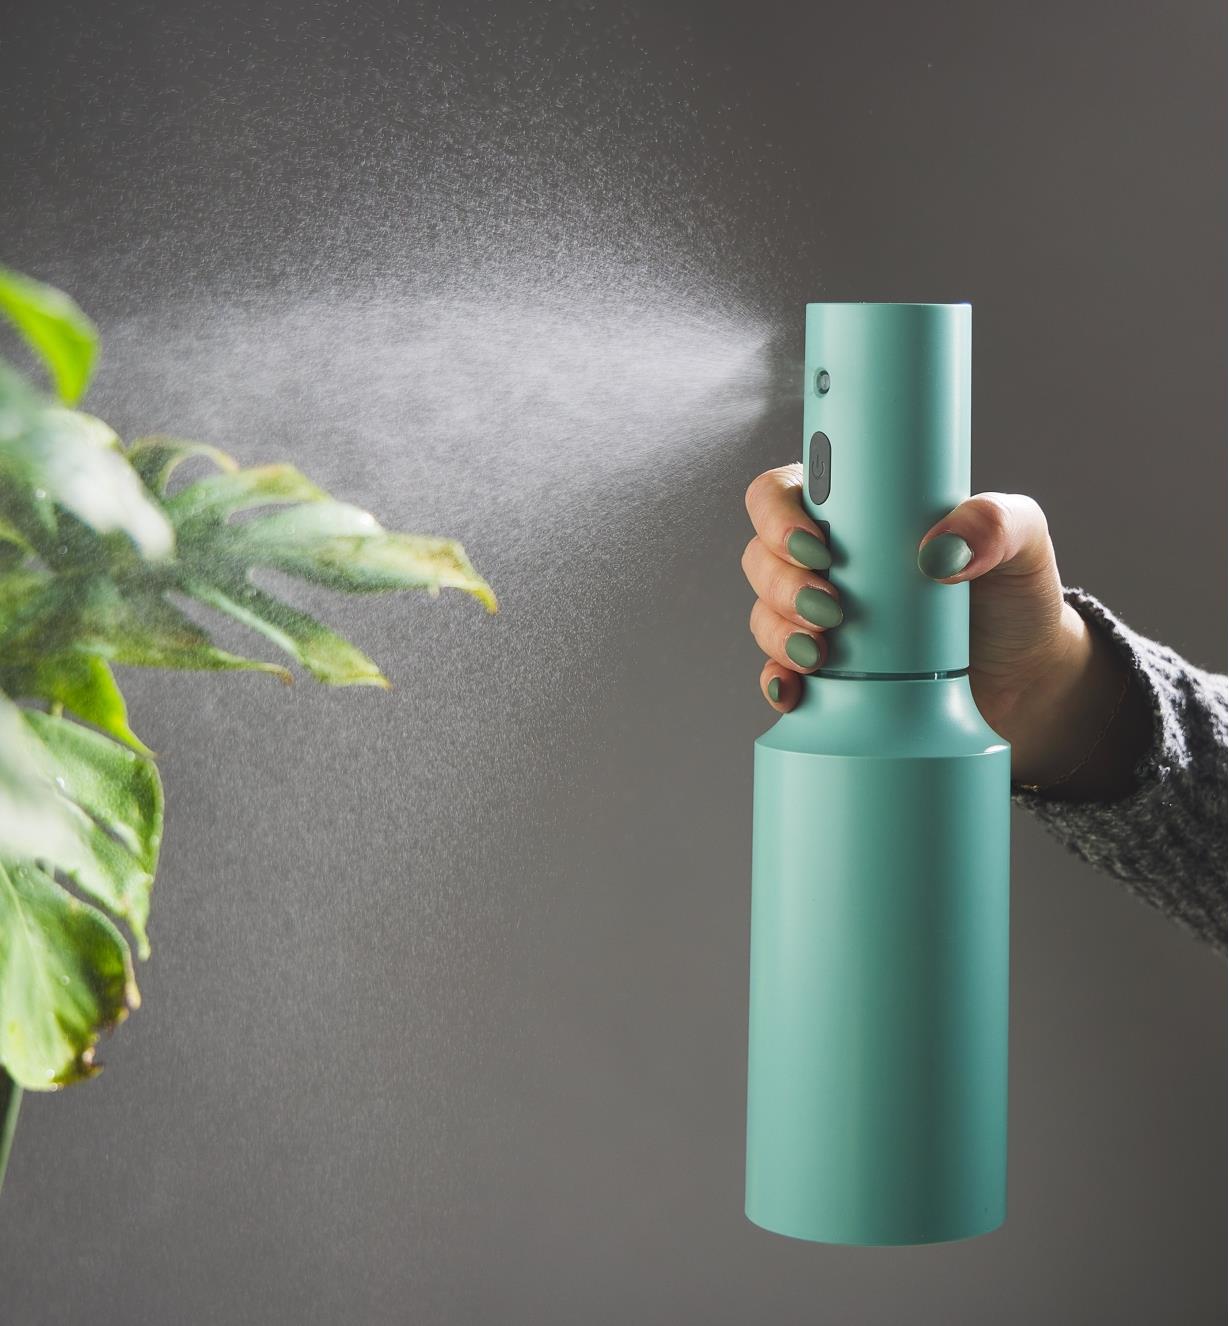 Using a rechargeable plant mister to spray a mist onto the leaves of a plant